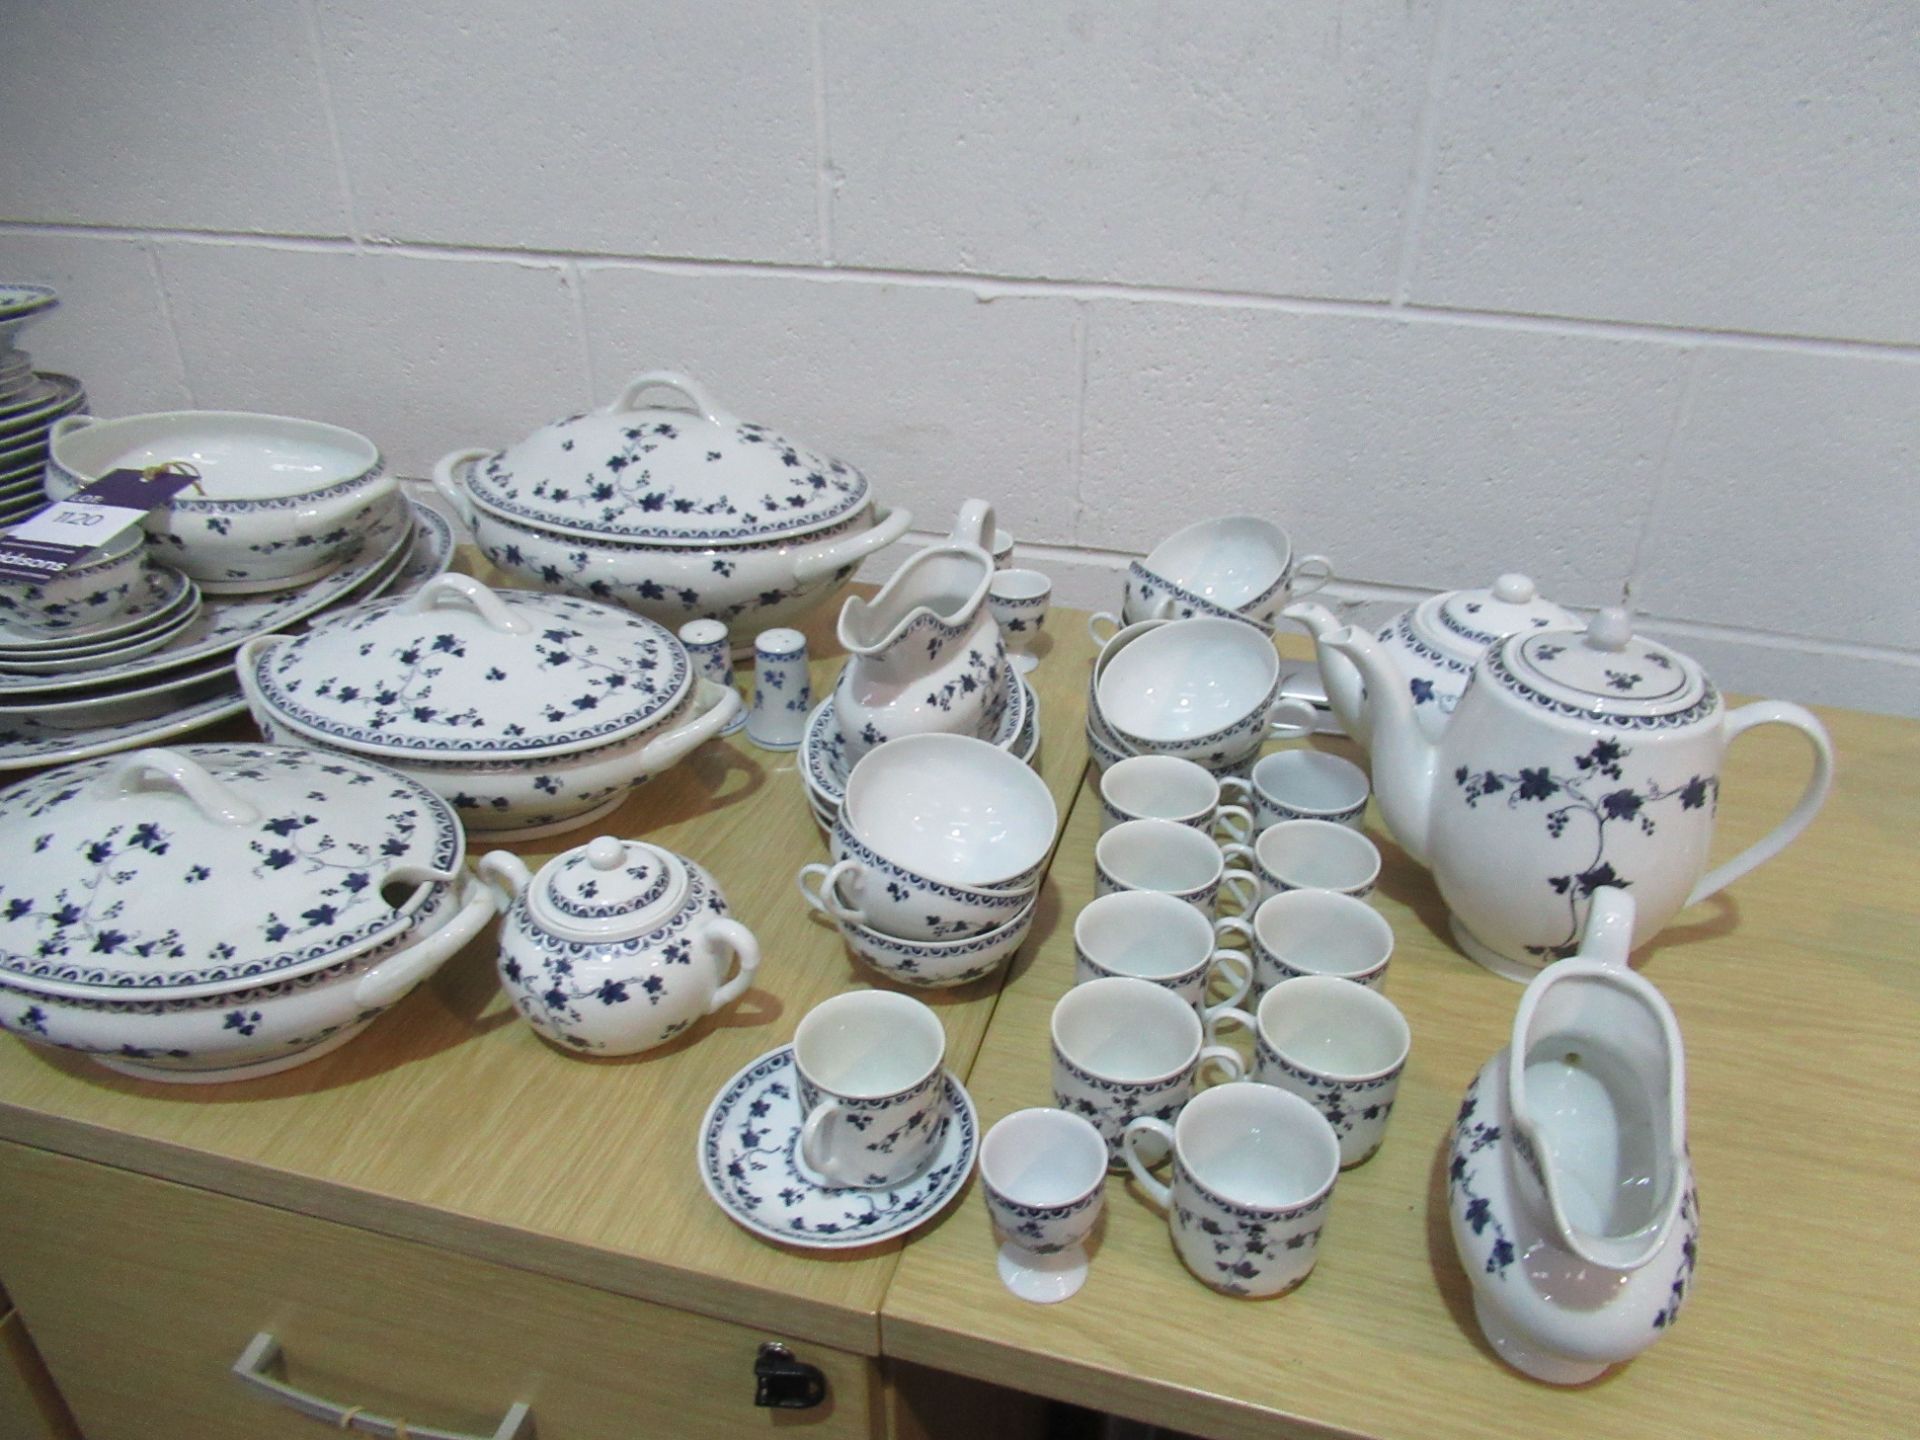 Extensive Porcelain Dinner Service decorated in a facsimile of the Royal Doulton Yorktown pattern - Image 2 of 3